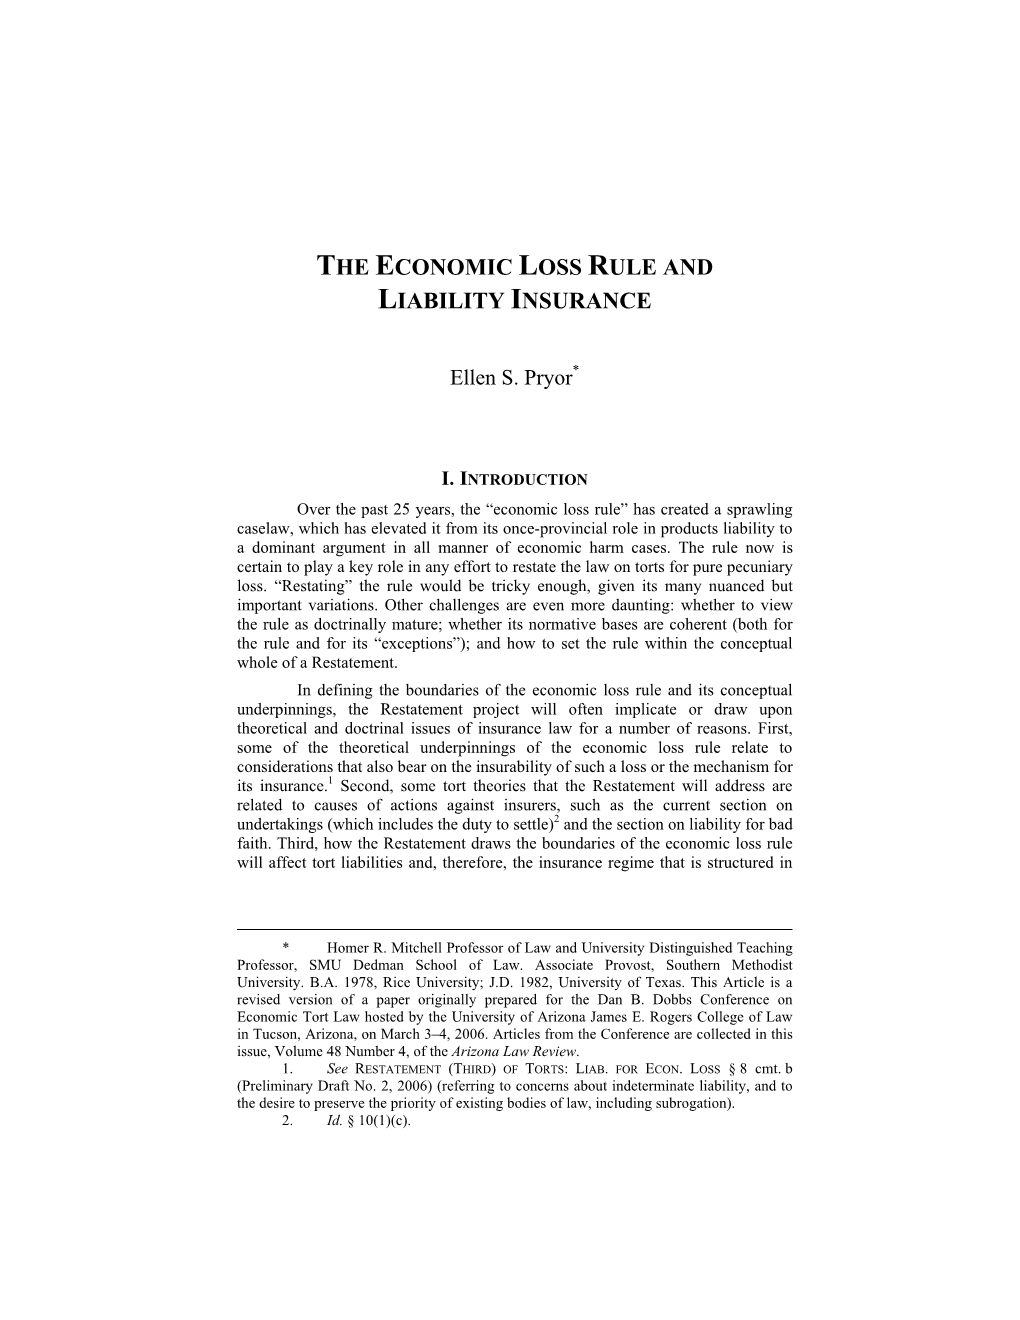 The Economic Loss Rule and Liability Insurance